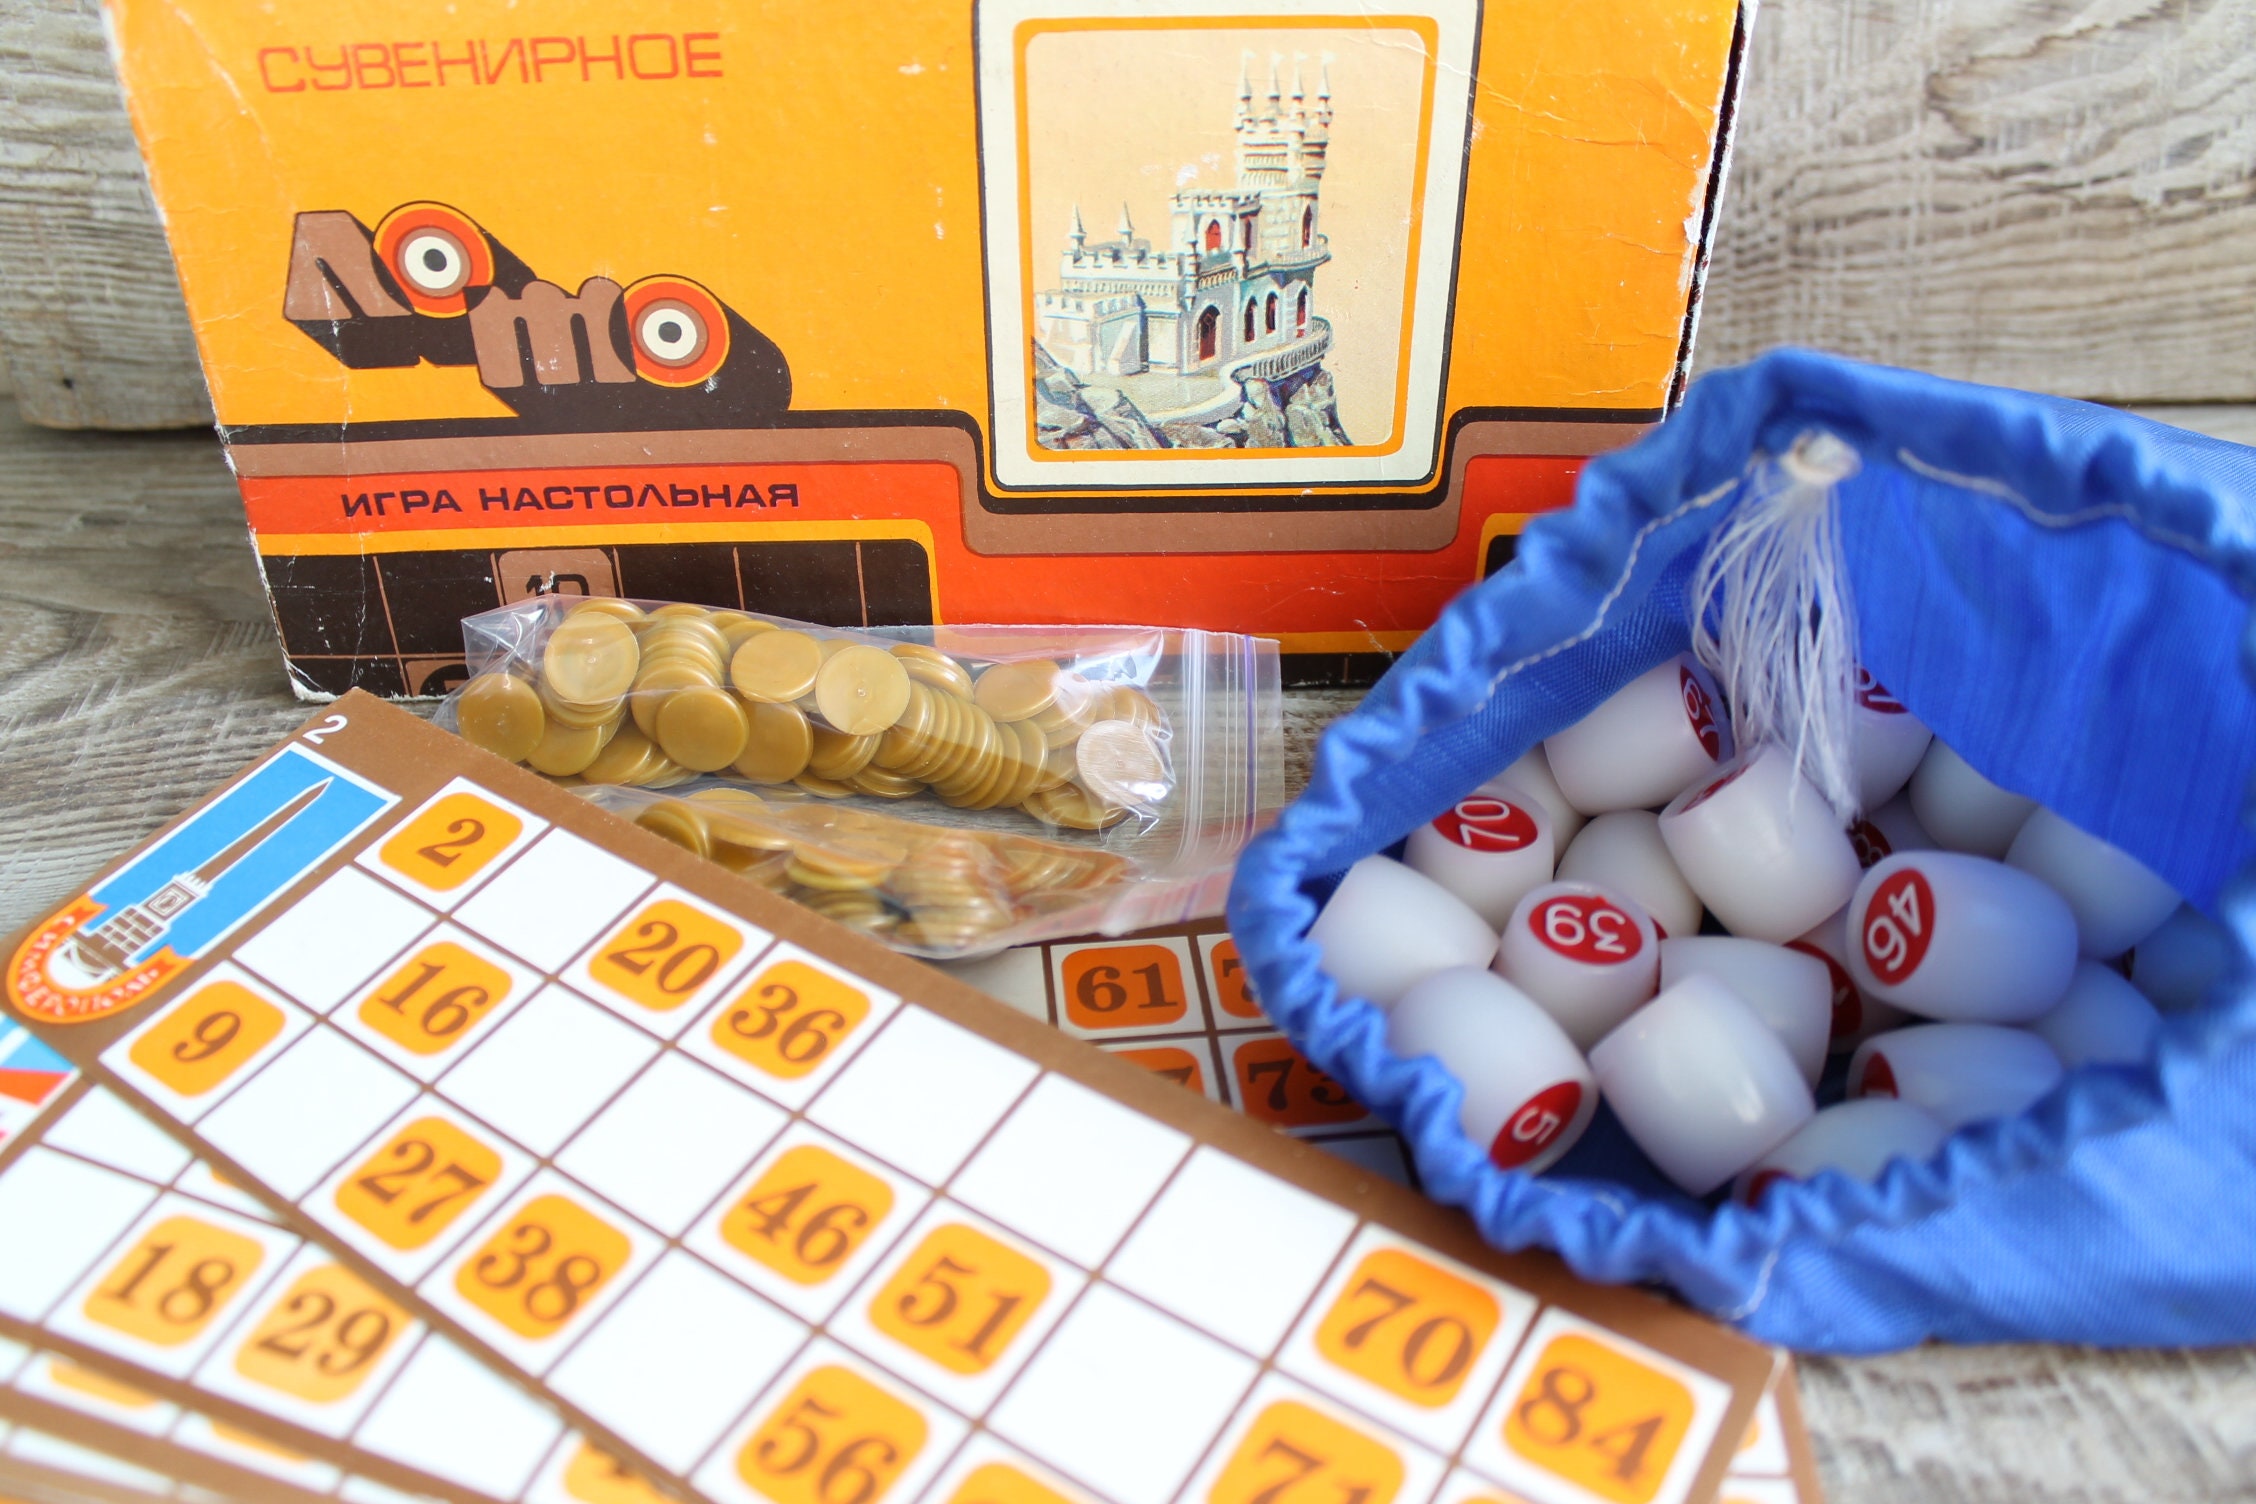  Extguds Tombola Bingo Game,Vintage Tombola Italian Game,Russian  Lotto with number1-90 for Lottery, for up to 24 Players : Toys & Games